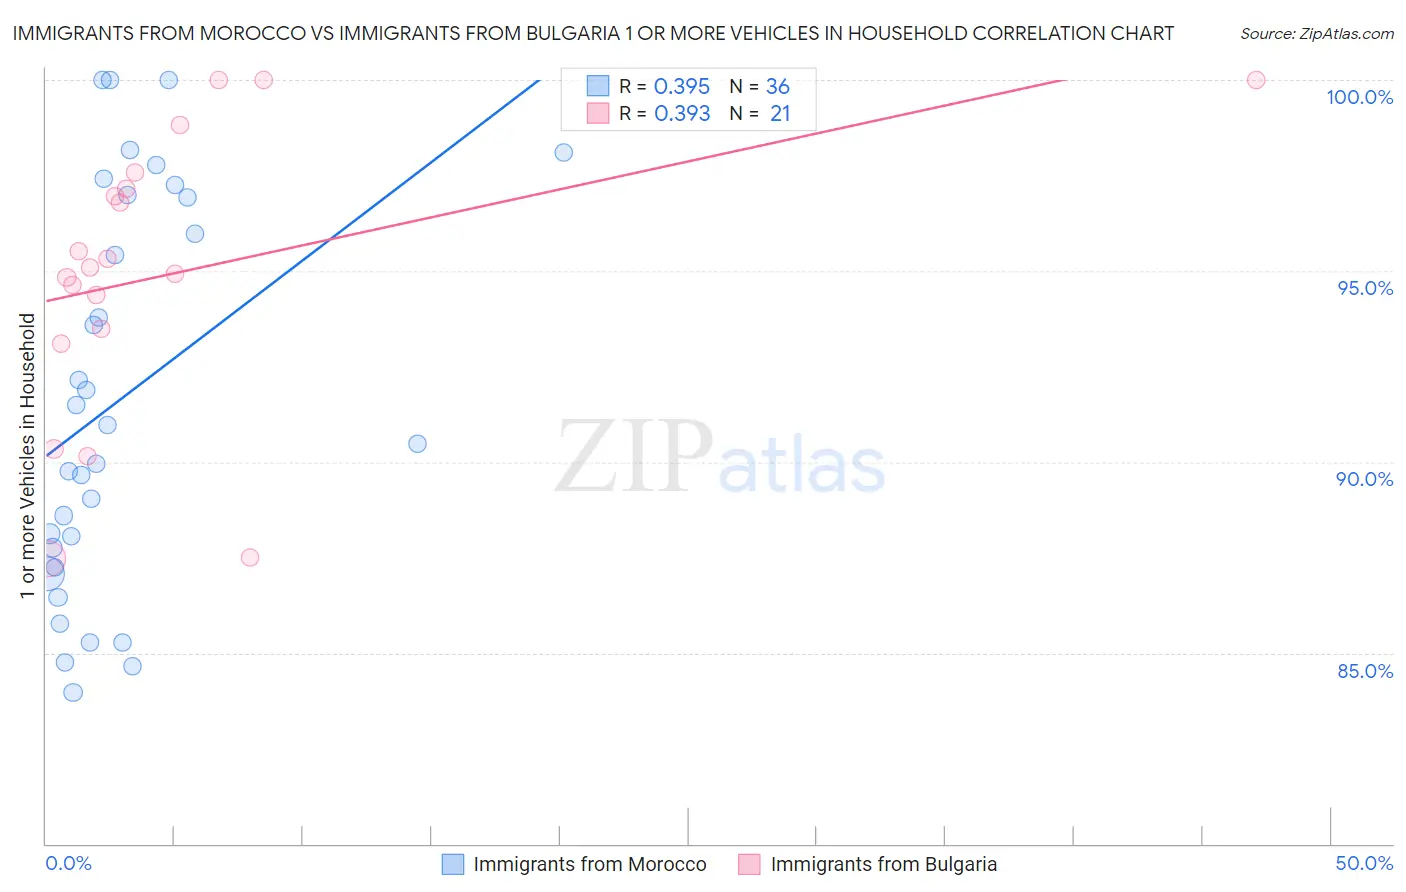 Immigrants from Morocco vs Immigrants from Bulgaria 1 or more Vehicles in Household